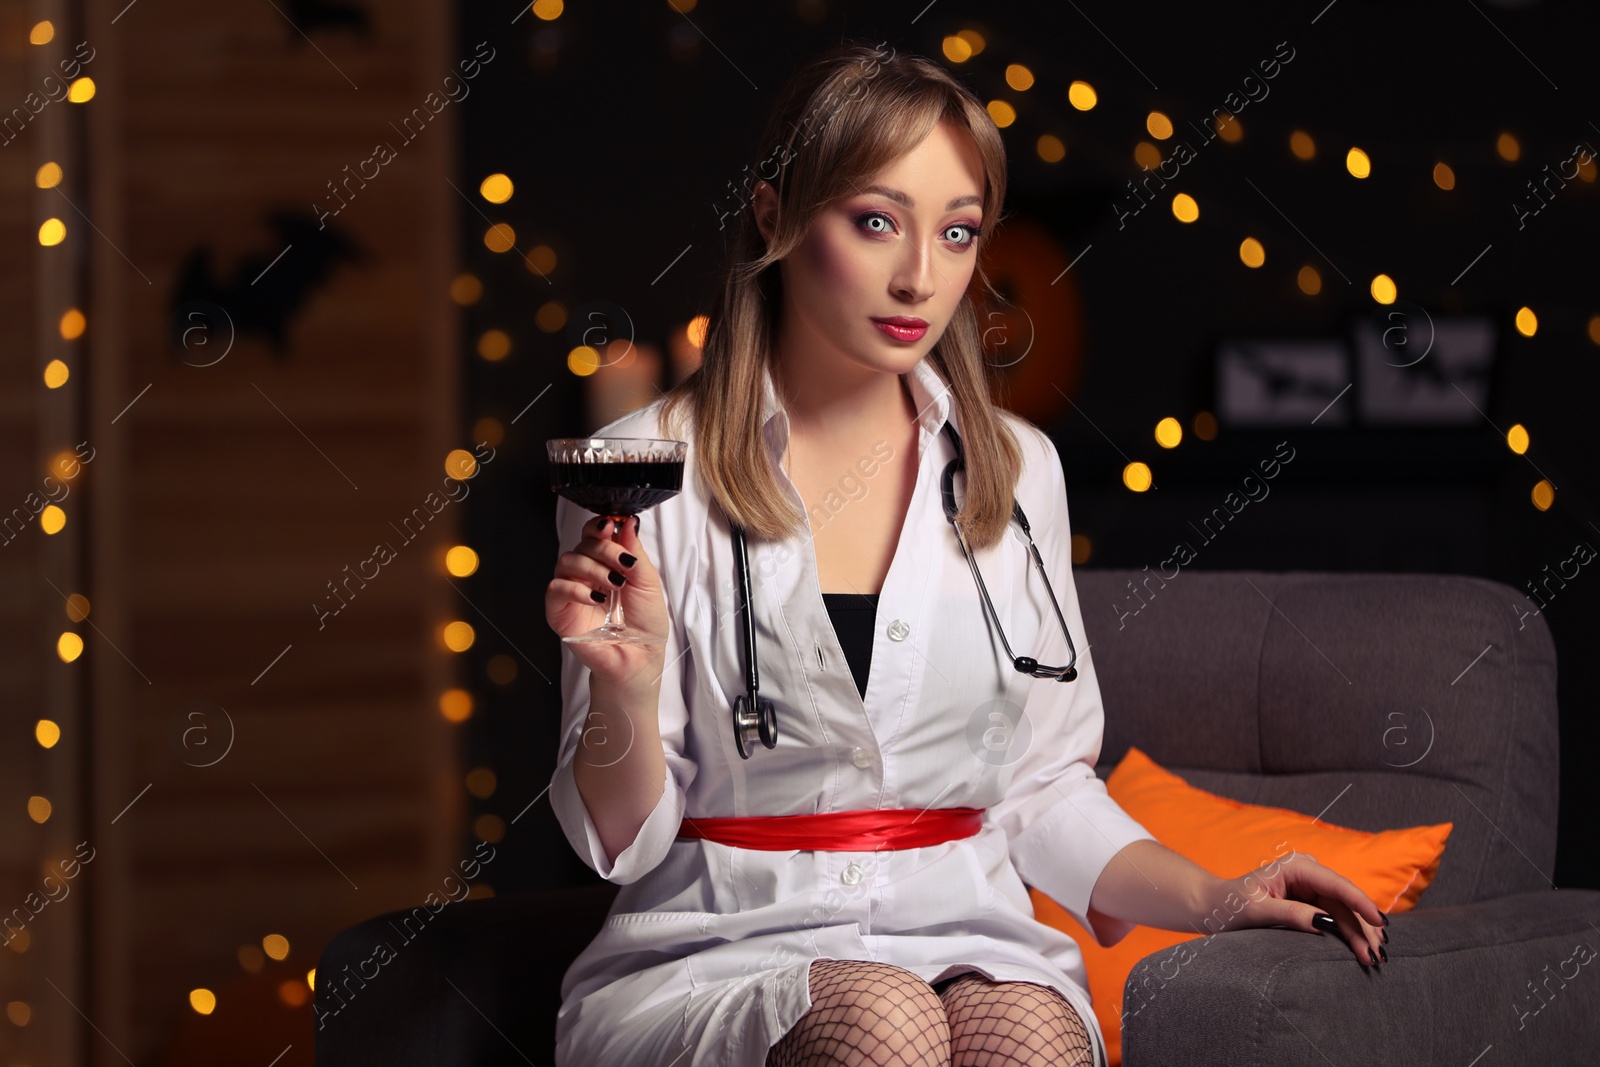 Photo of Woman in scary nurse costume with glass of wine against blurred lights indoors. Halloween celebration